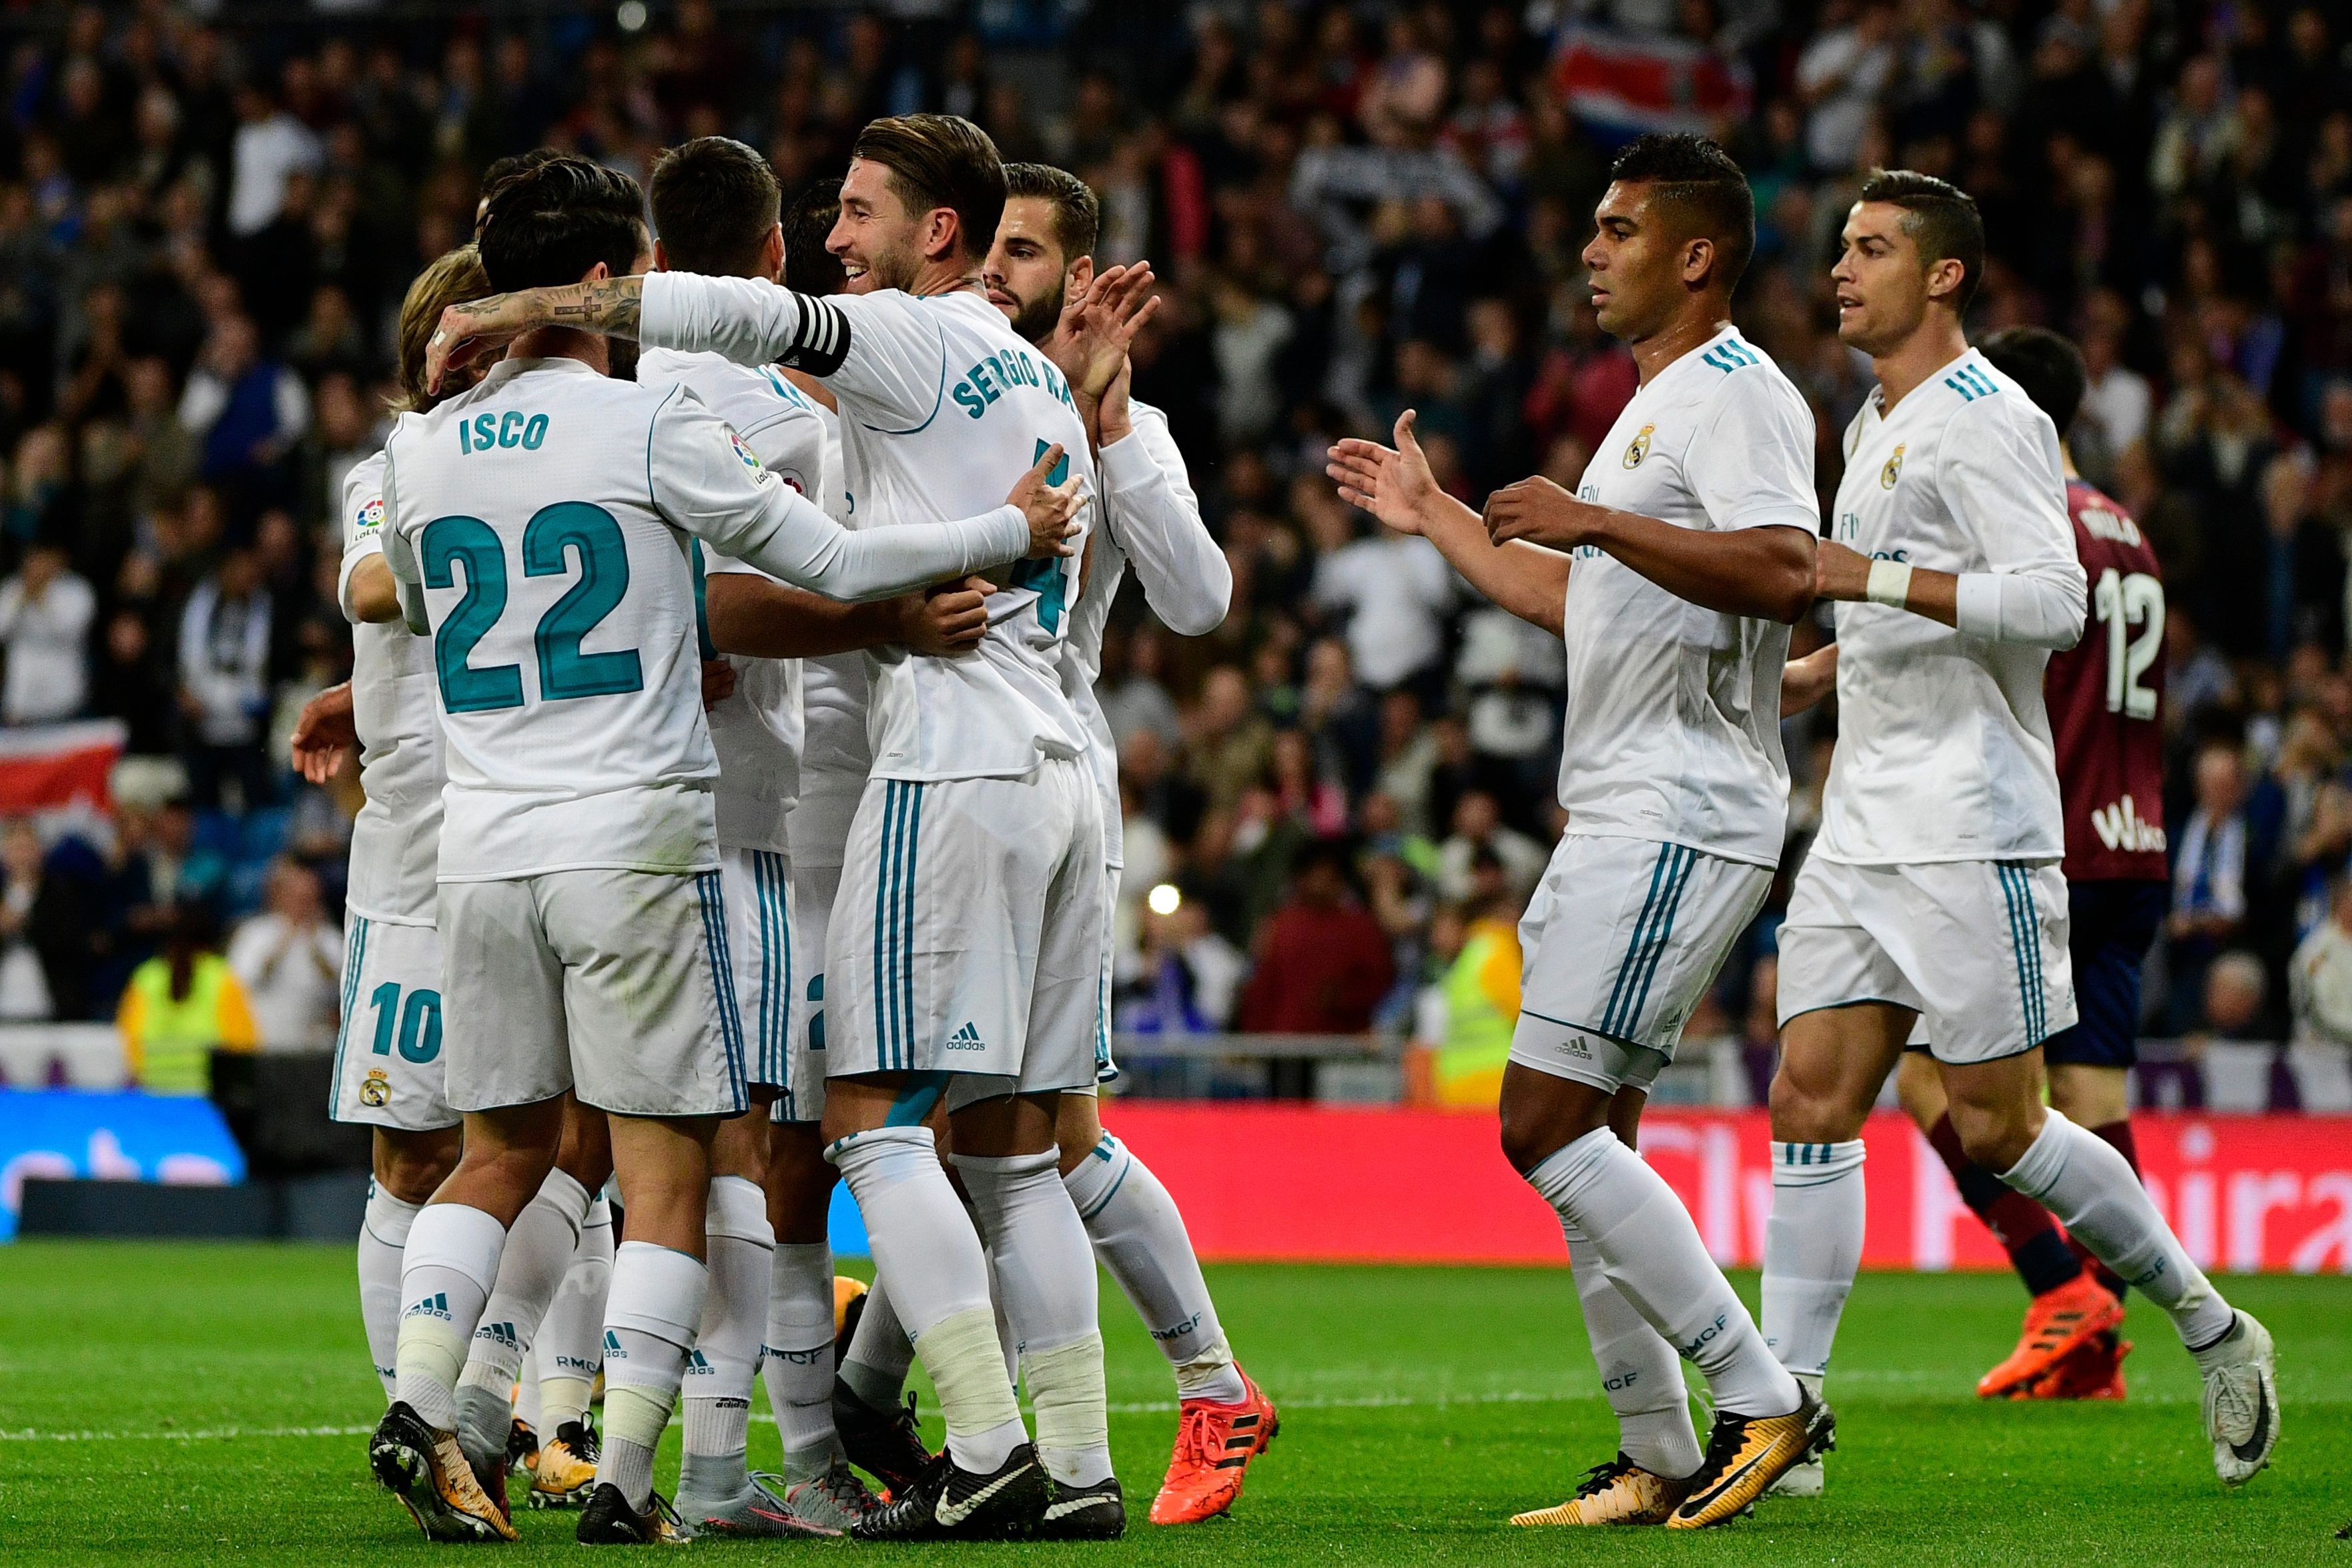 Real Madrid's players celebrate a goal during the Spanish league football match Real Madrid CF vs SD Eibar at the Santiago Bernabeu stadium in Madrid on October 22, 2017. / AFP PHOTO / PIERRE-PHILIPPE MARCOU        (Photo credit should read PIERRE-PHILIPPE MARCOU/AFP/Getty Images)